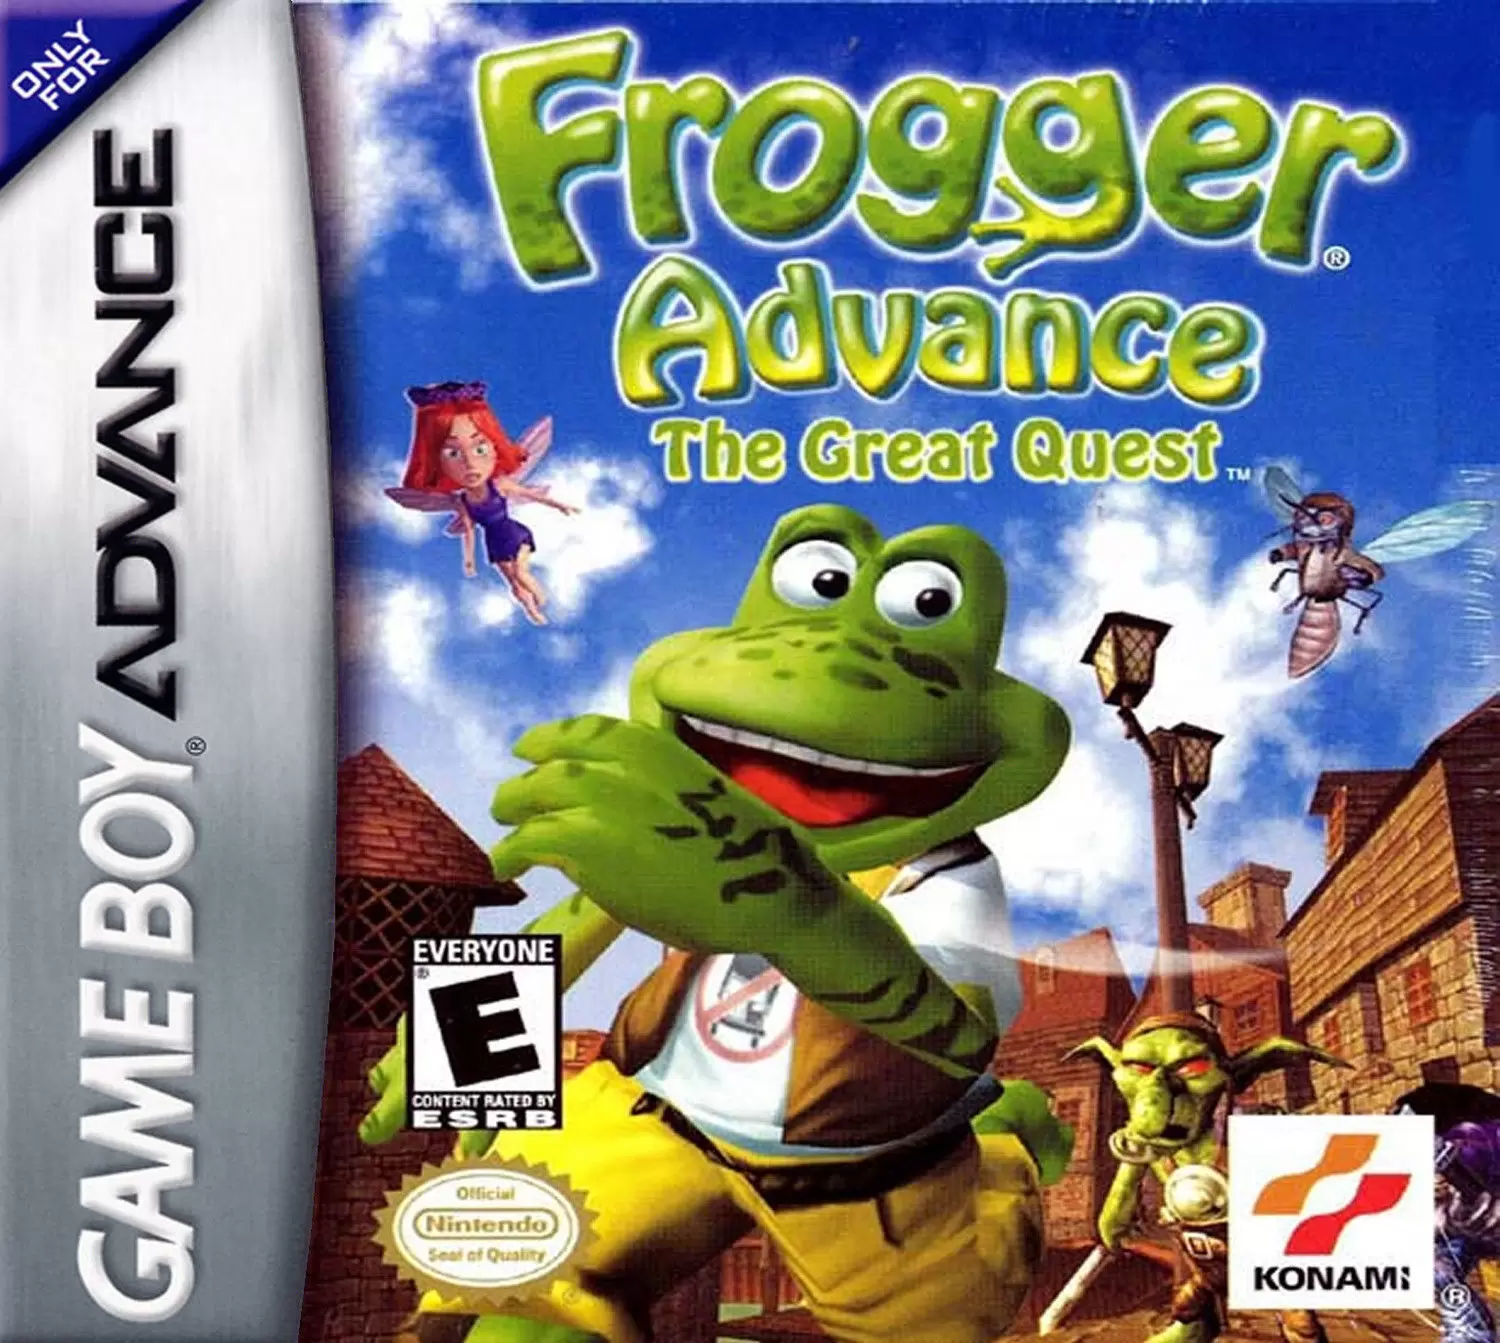 Game Boy Advance Games - Frogger Advance: The Great Quest